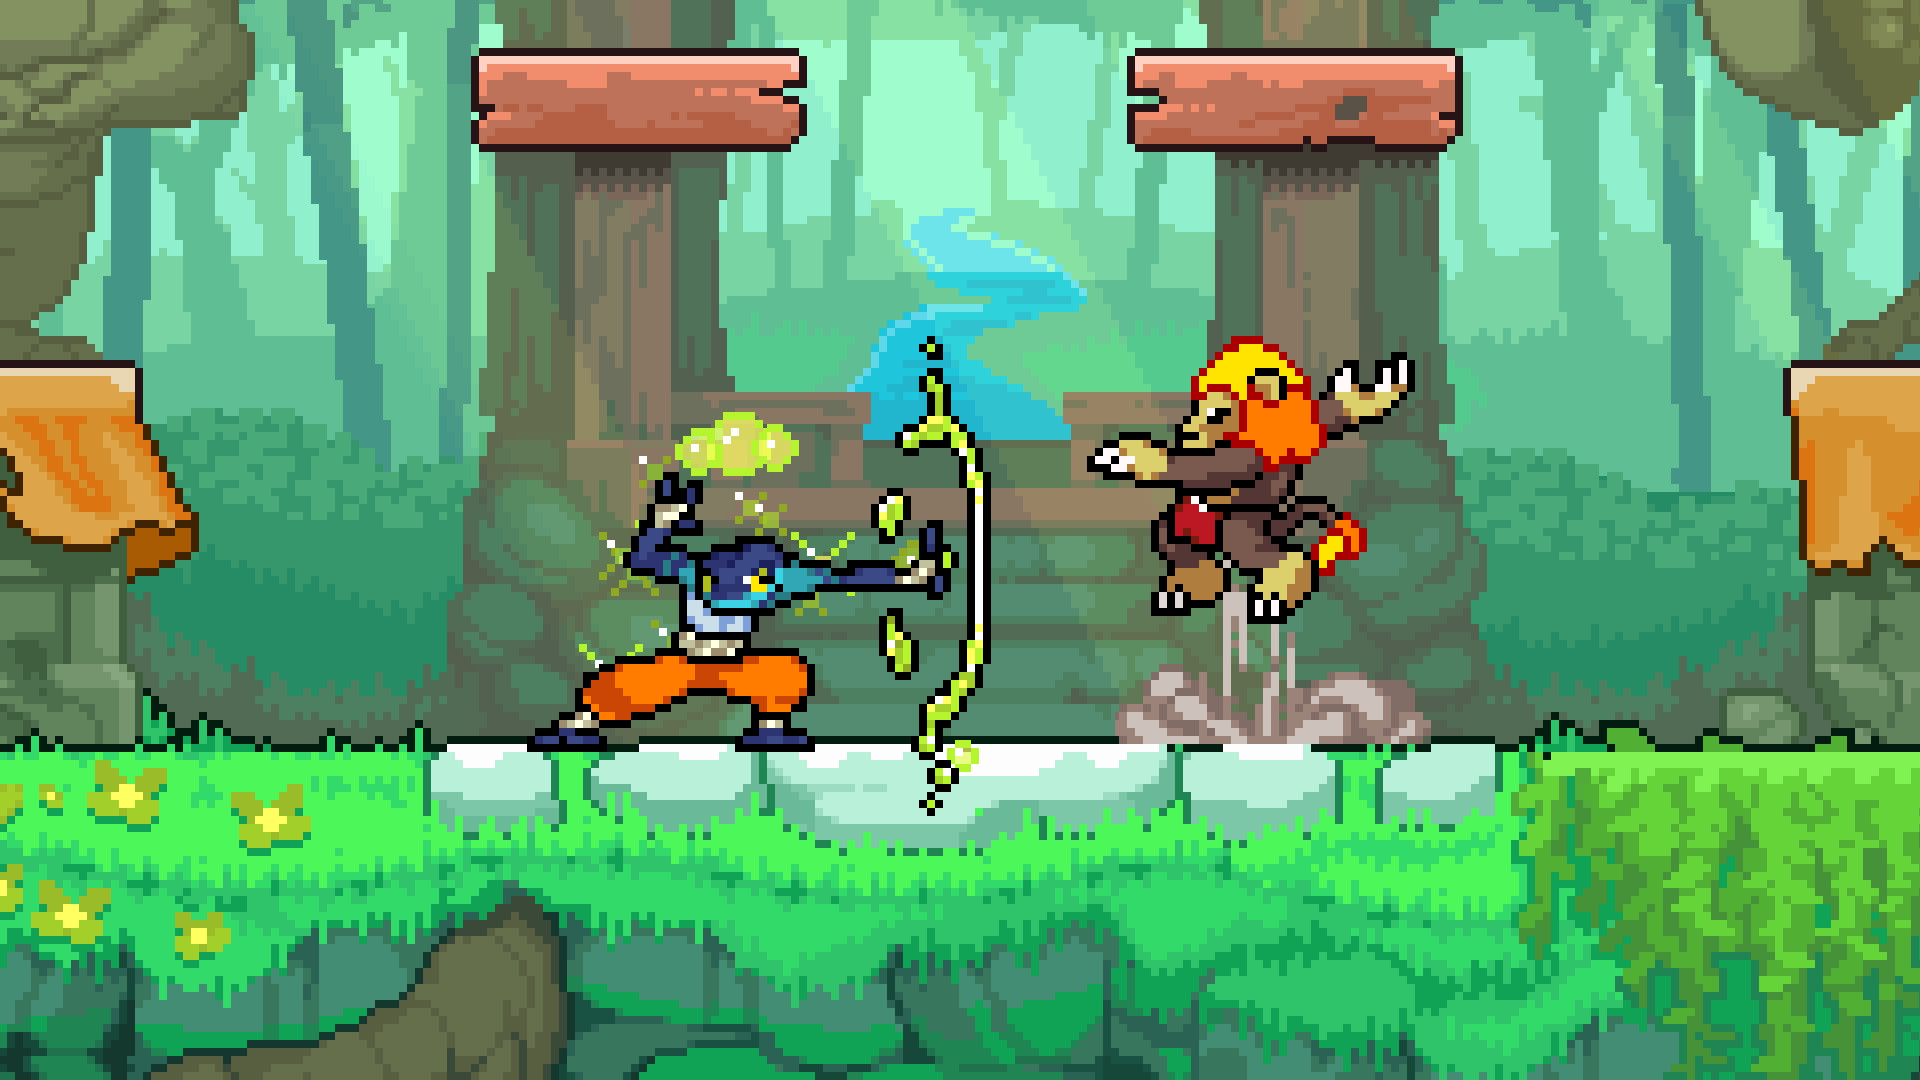 A 1v1 fight in the forest on Rivals of Aether